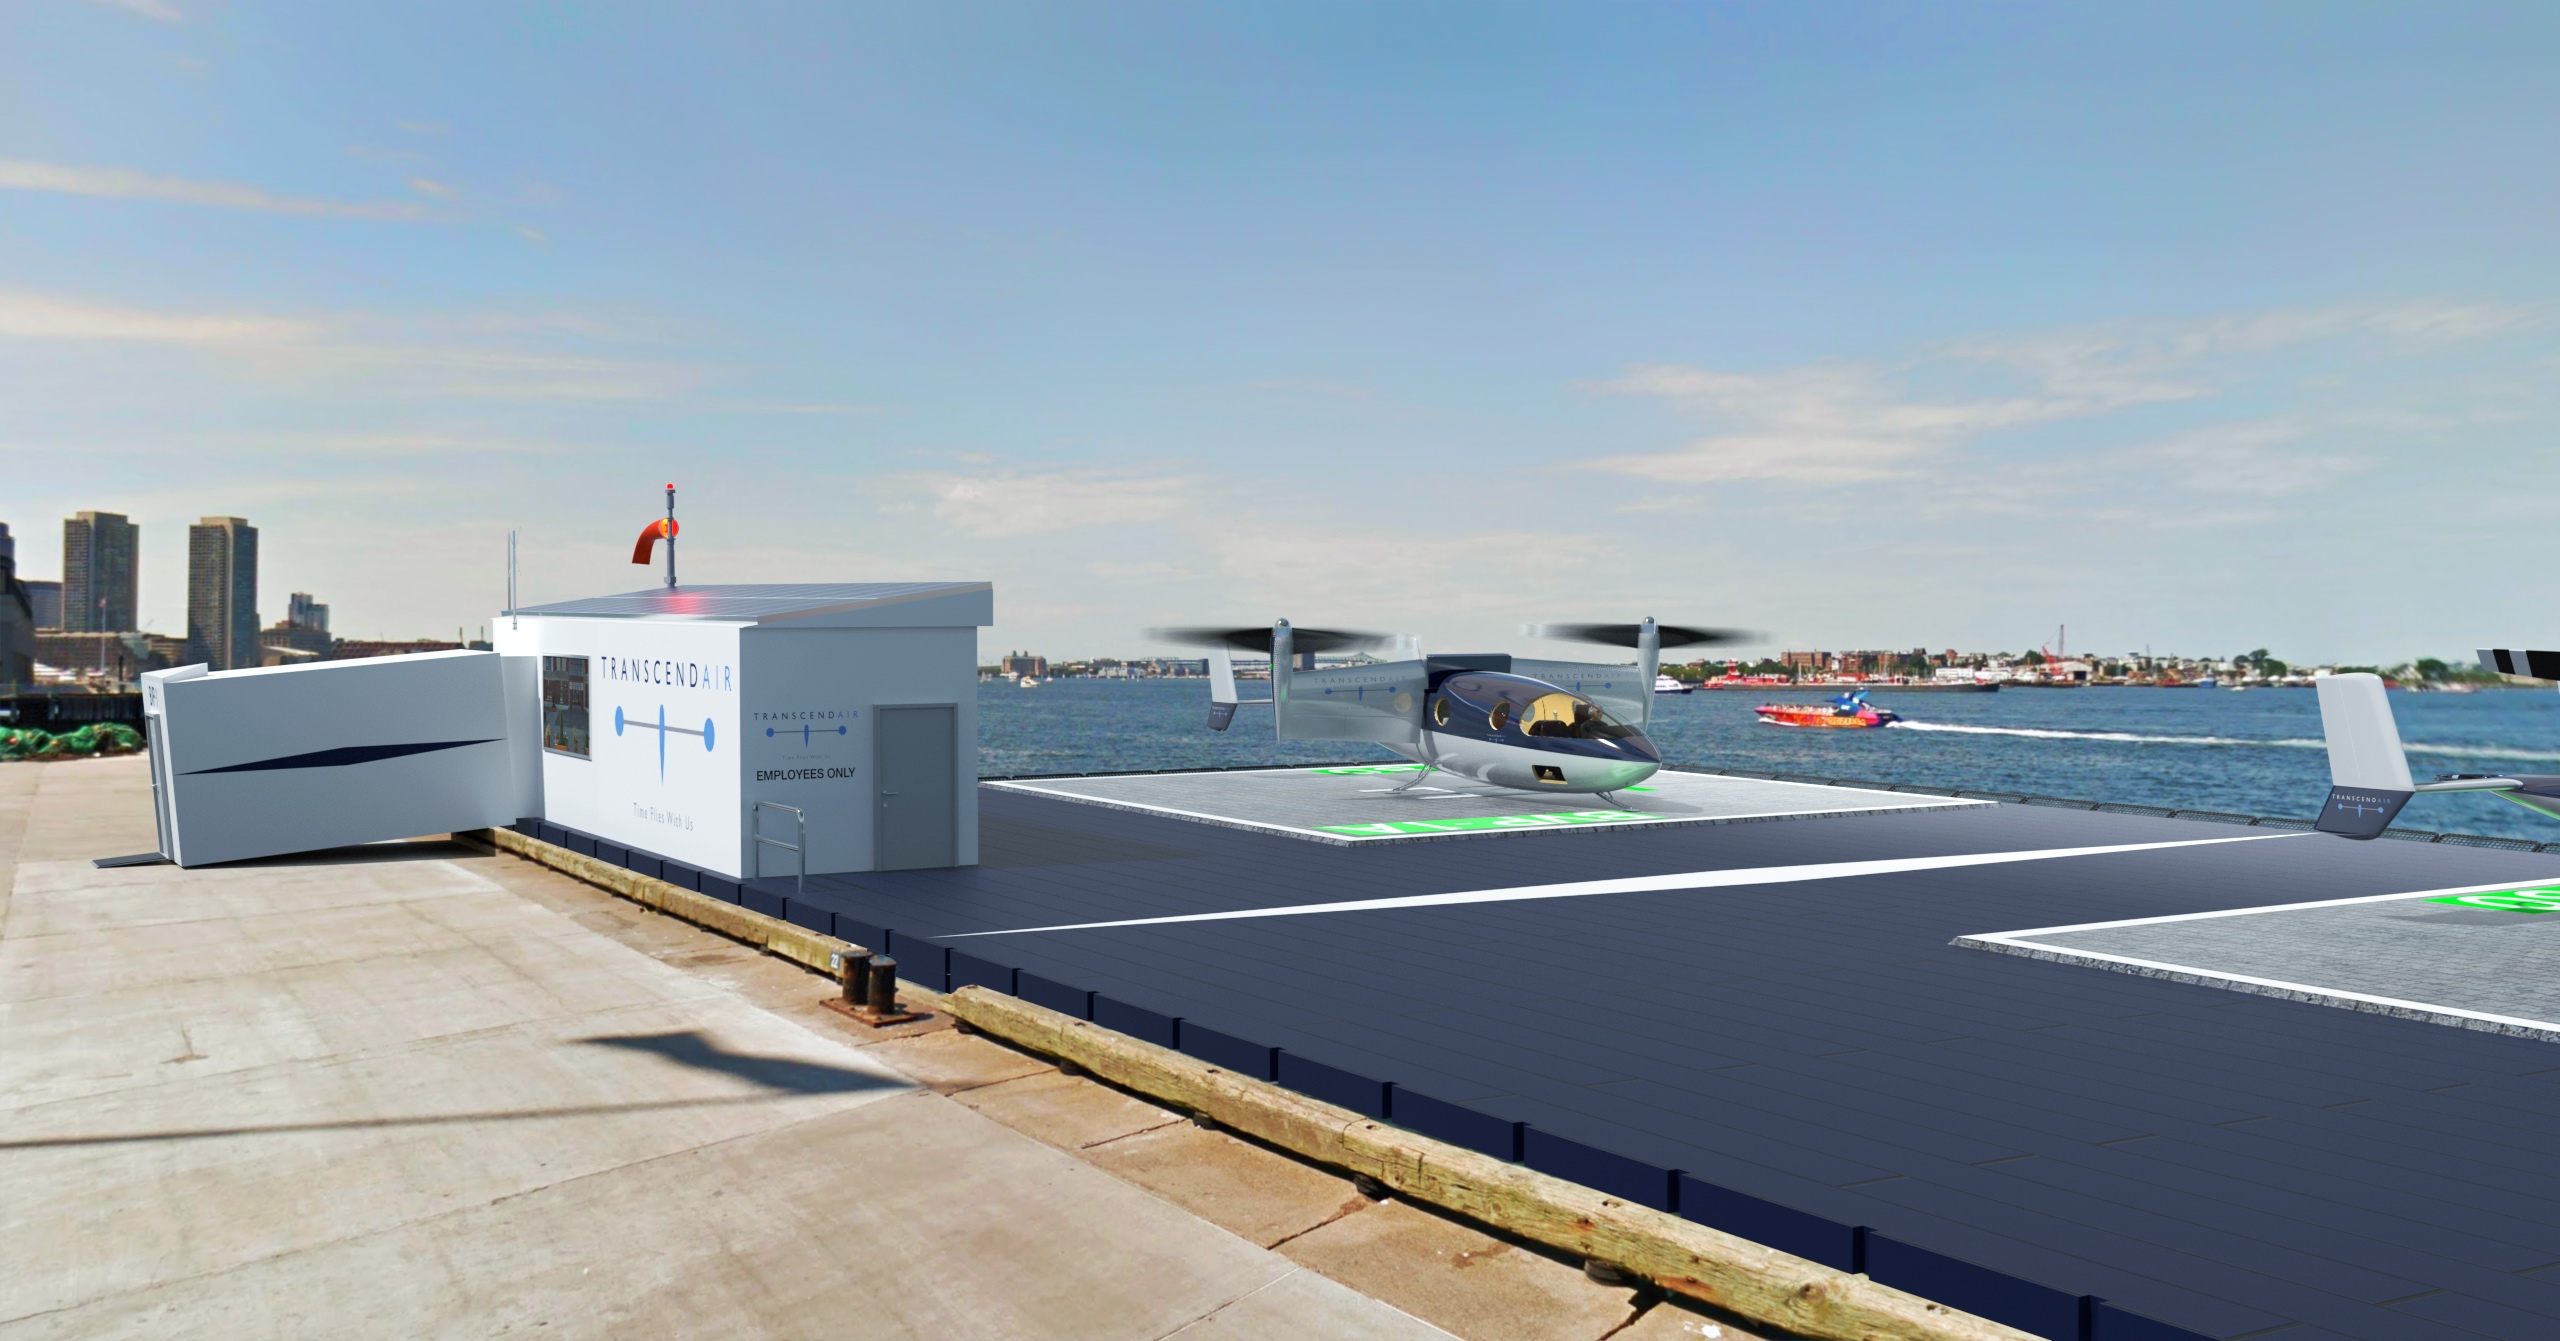 Aiming to give travellers an alternative to airports, two US companies, Transcend Air Corporation and Lily Helipads, have teamed up to offer floating landing pads for Transcend’s vertical take-off air taxis, which are in development.